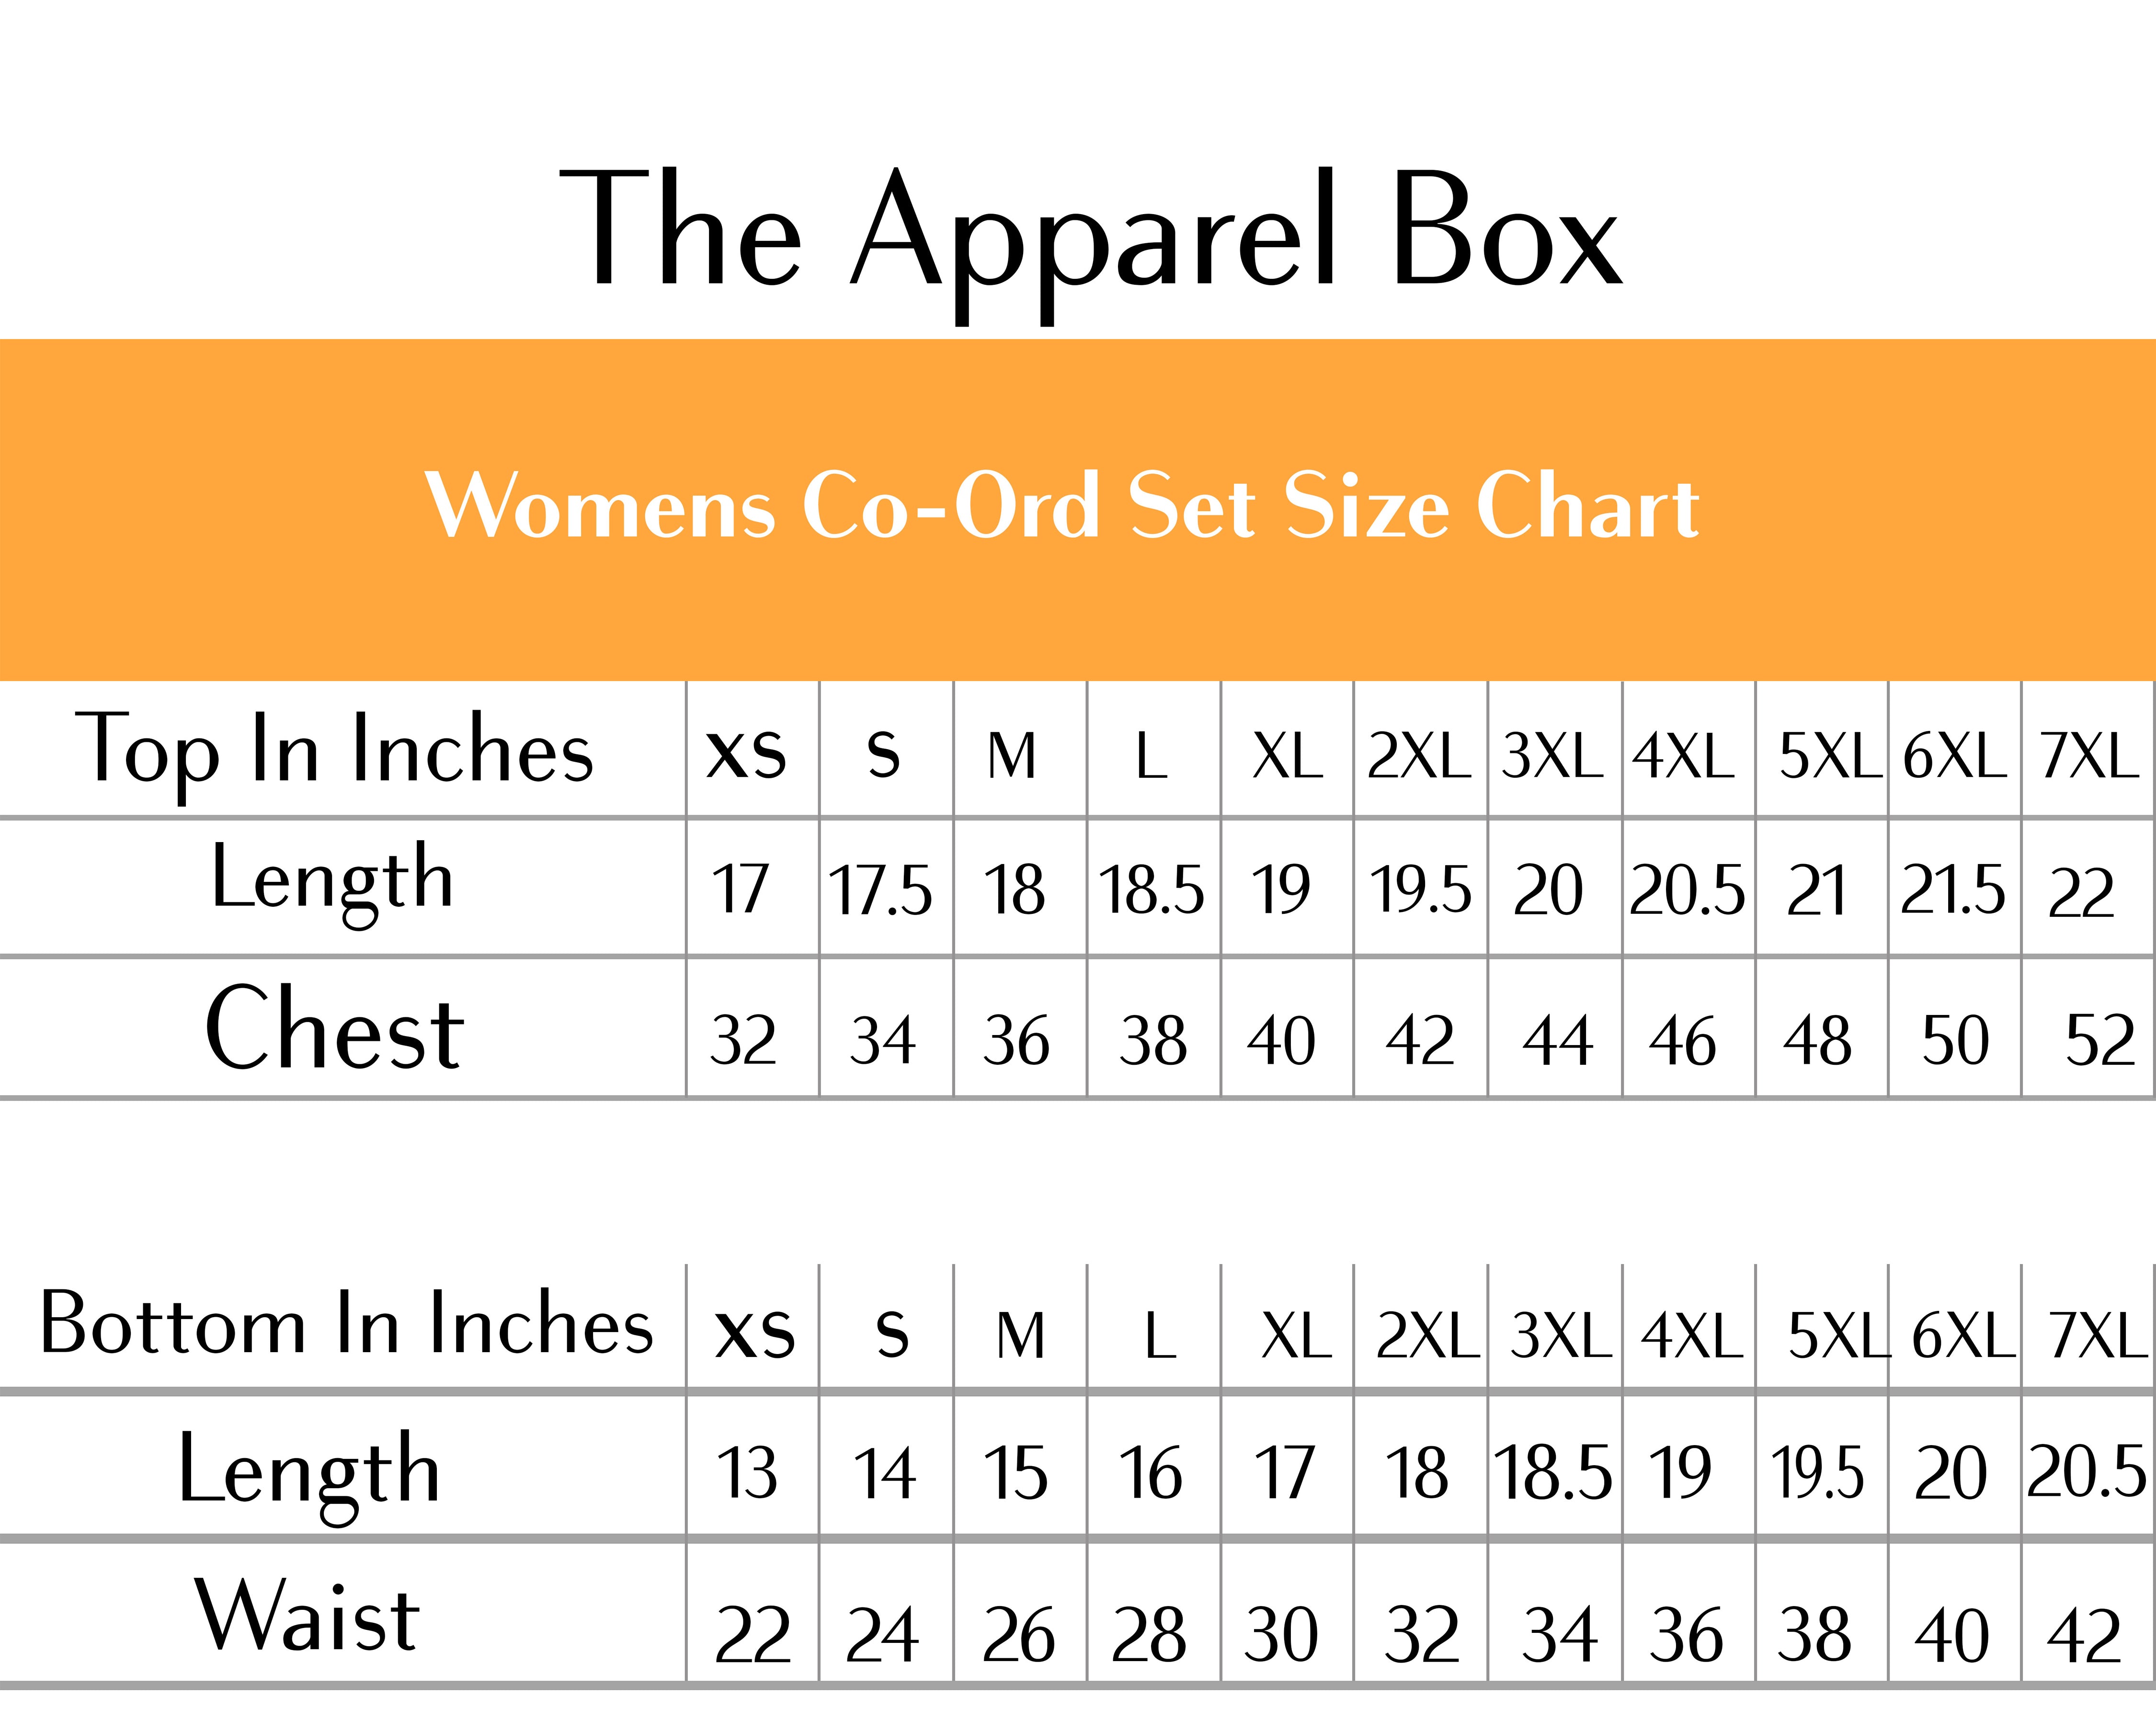 Womens Co-Ord Set Size Chart – The Apparel Box